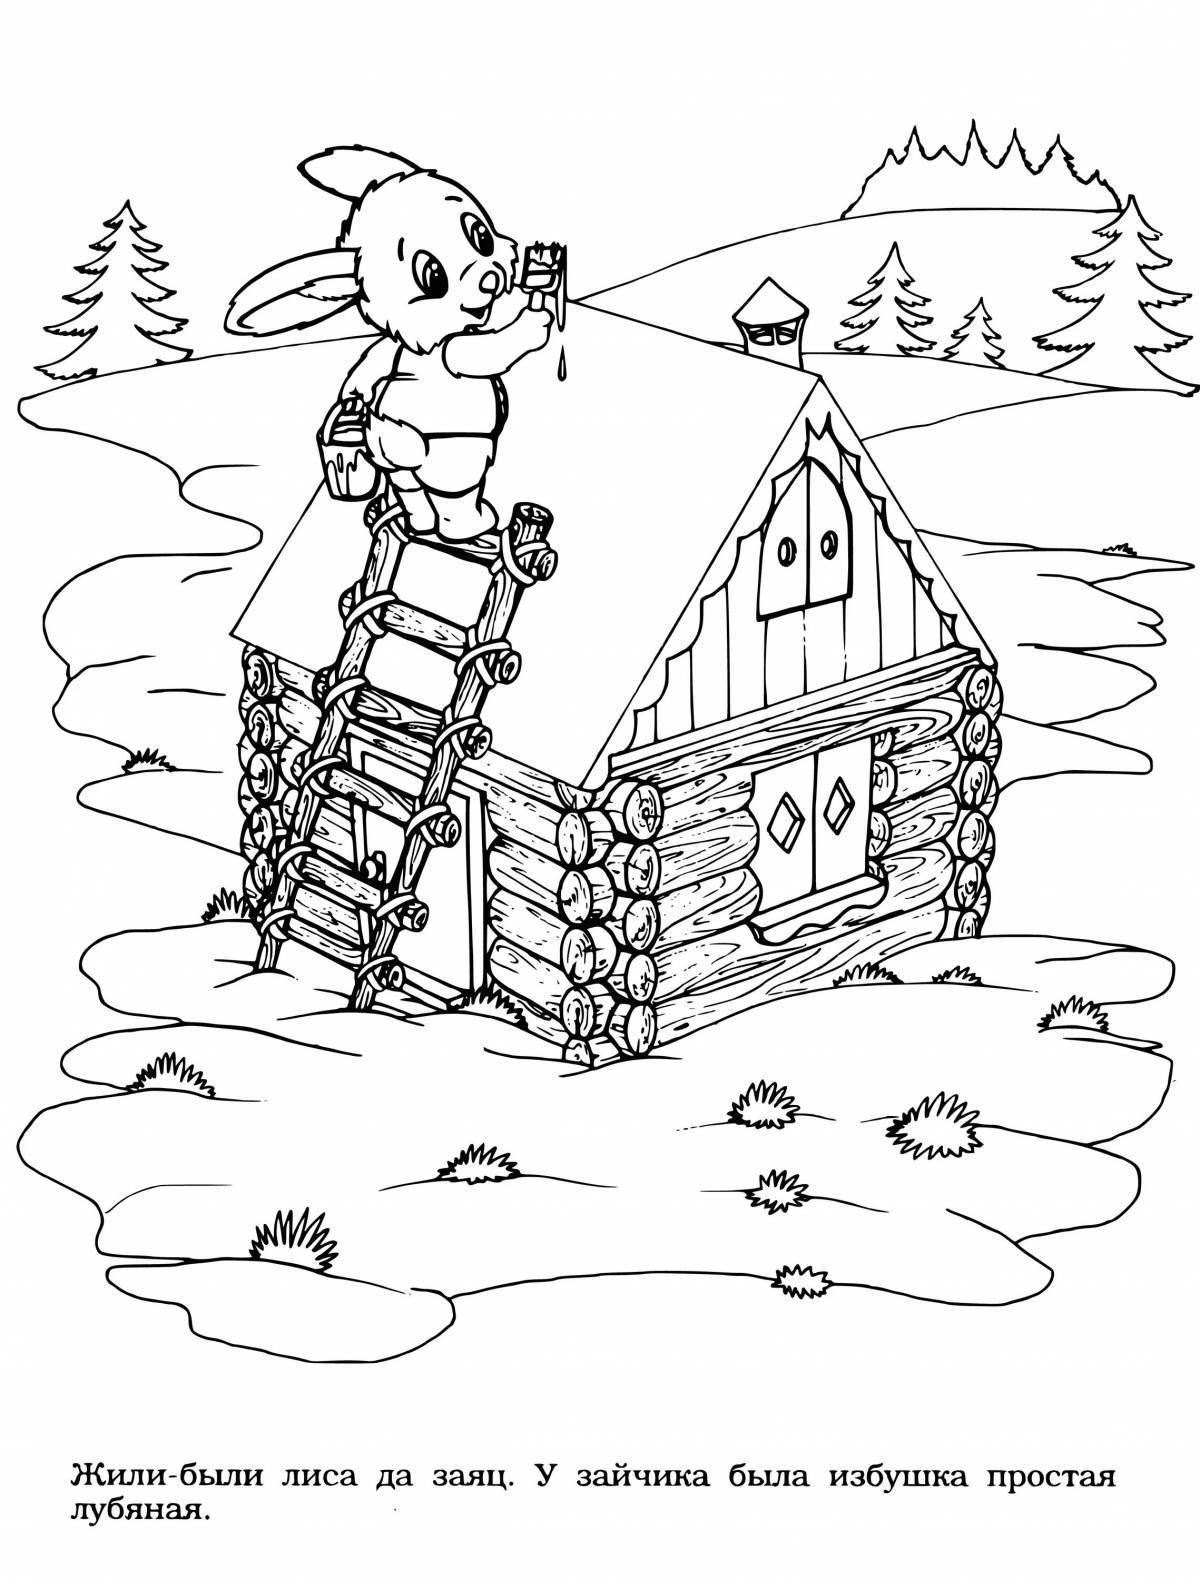 Coloring page spectacular bast and ice hut